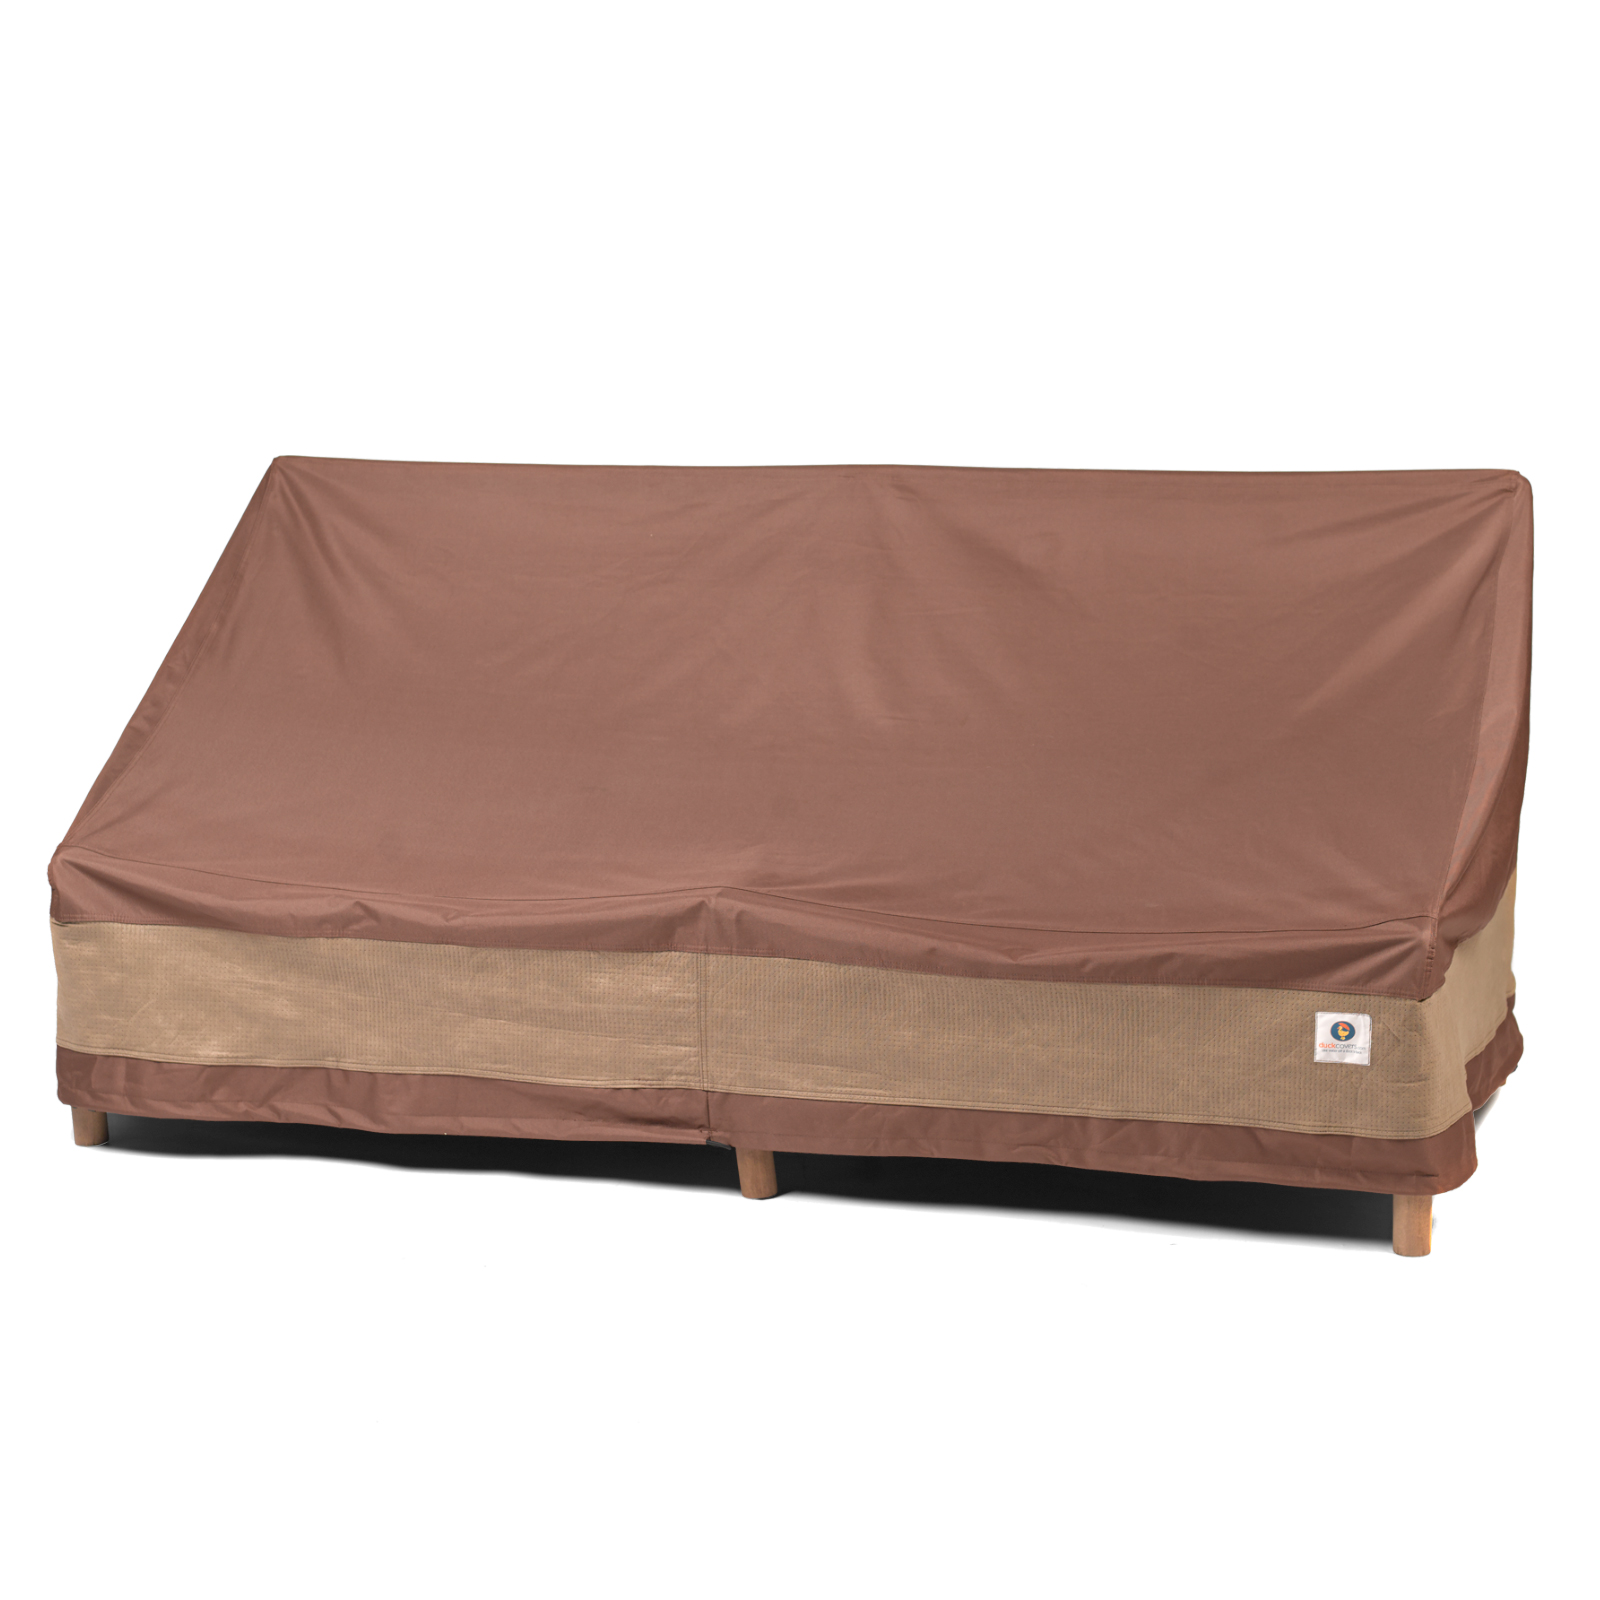 Duck Covers-USO934035-Sofa Covers Ultimate (Extreme Duty)  93W x 40D x 35H